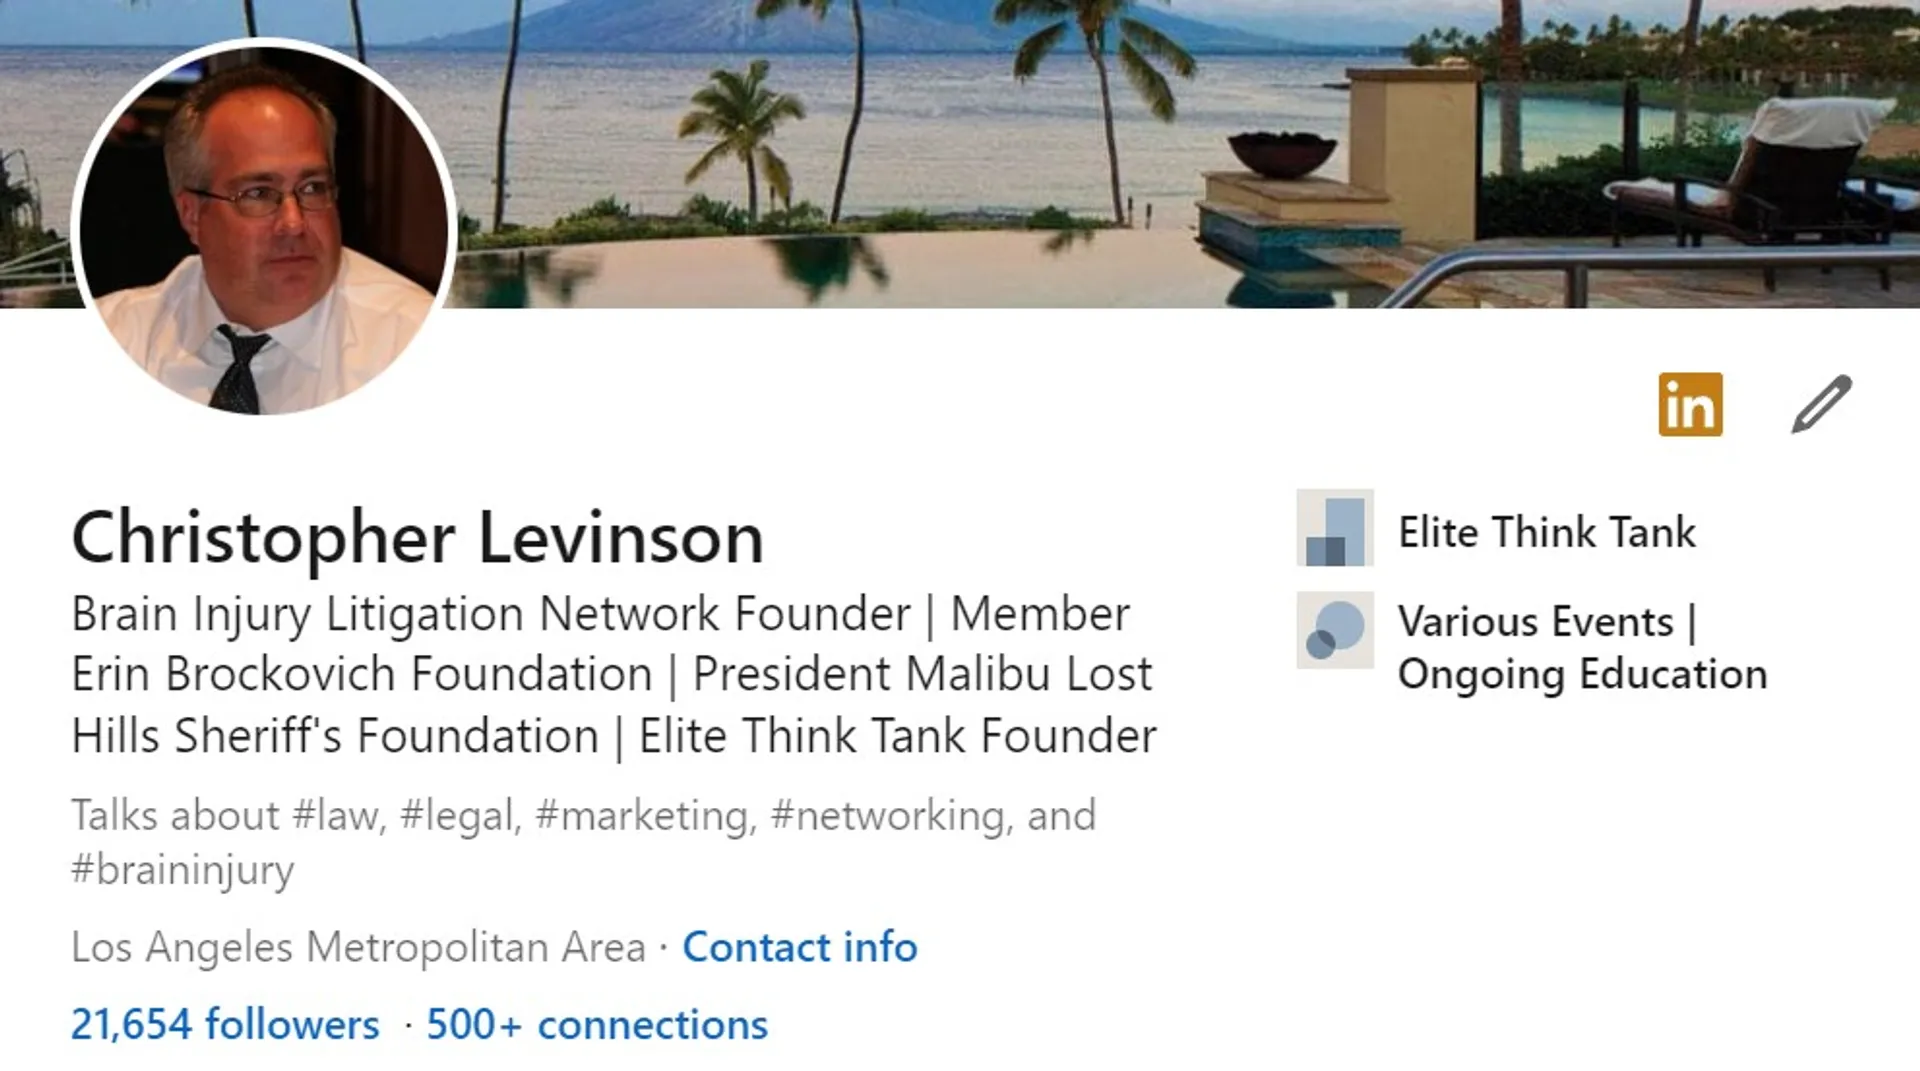 Are We Connected On LinkedIn - Feel Free To Follow Me For Great Updates & Worthwhile Information https://www.linkedin.com/in/chrislevinson/

#Technology  #Law  #Medicine  #BrainInjury  #Aviation  #Enviornment  #ArtifialIntelligence  #Marketing  #Networking  #LawFirms  #Attorneys  #Education  #News  